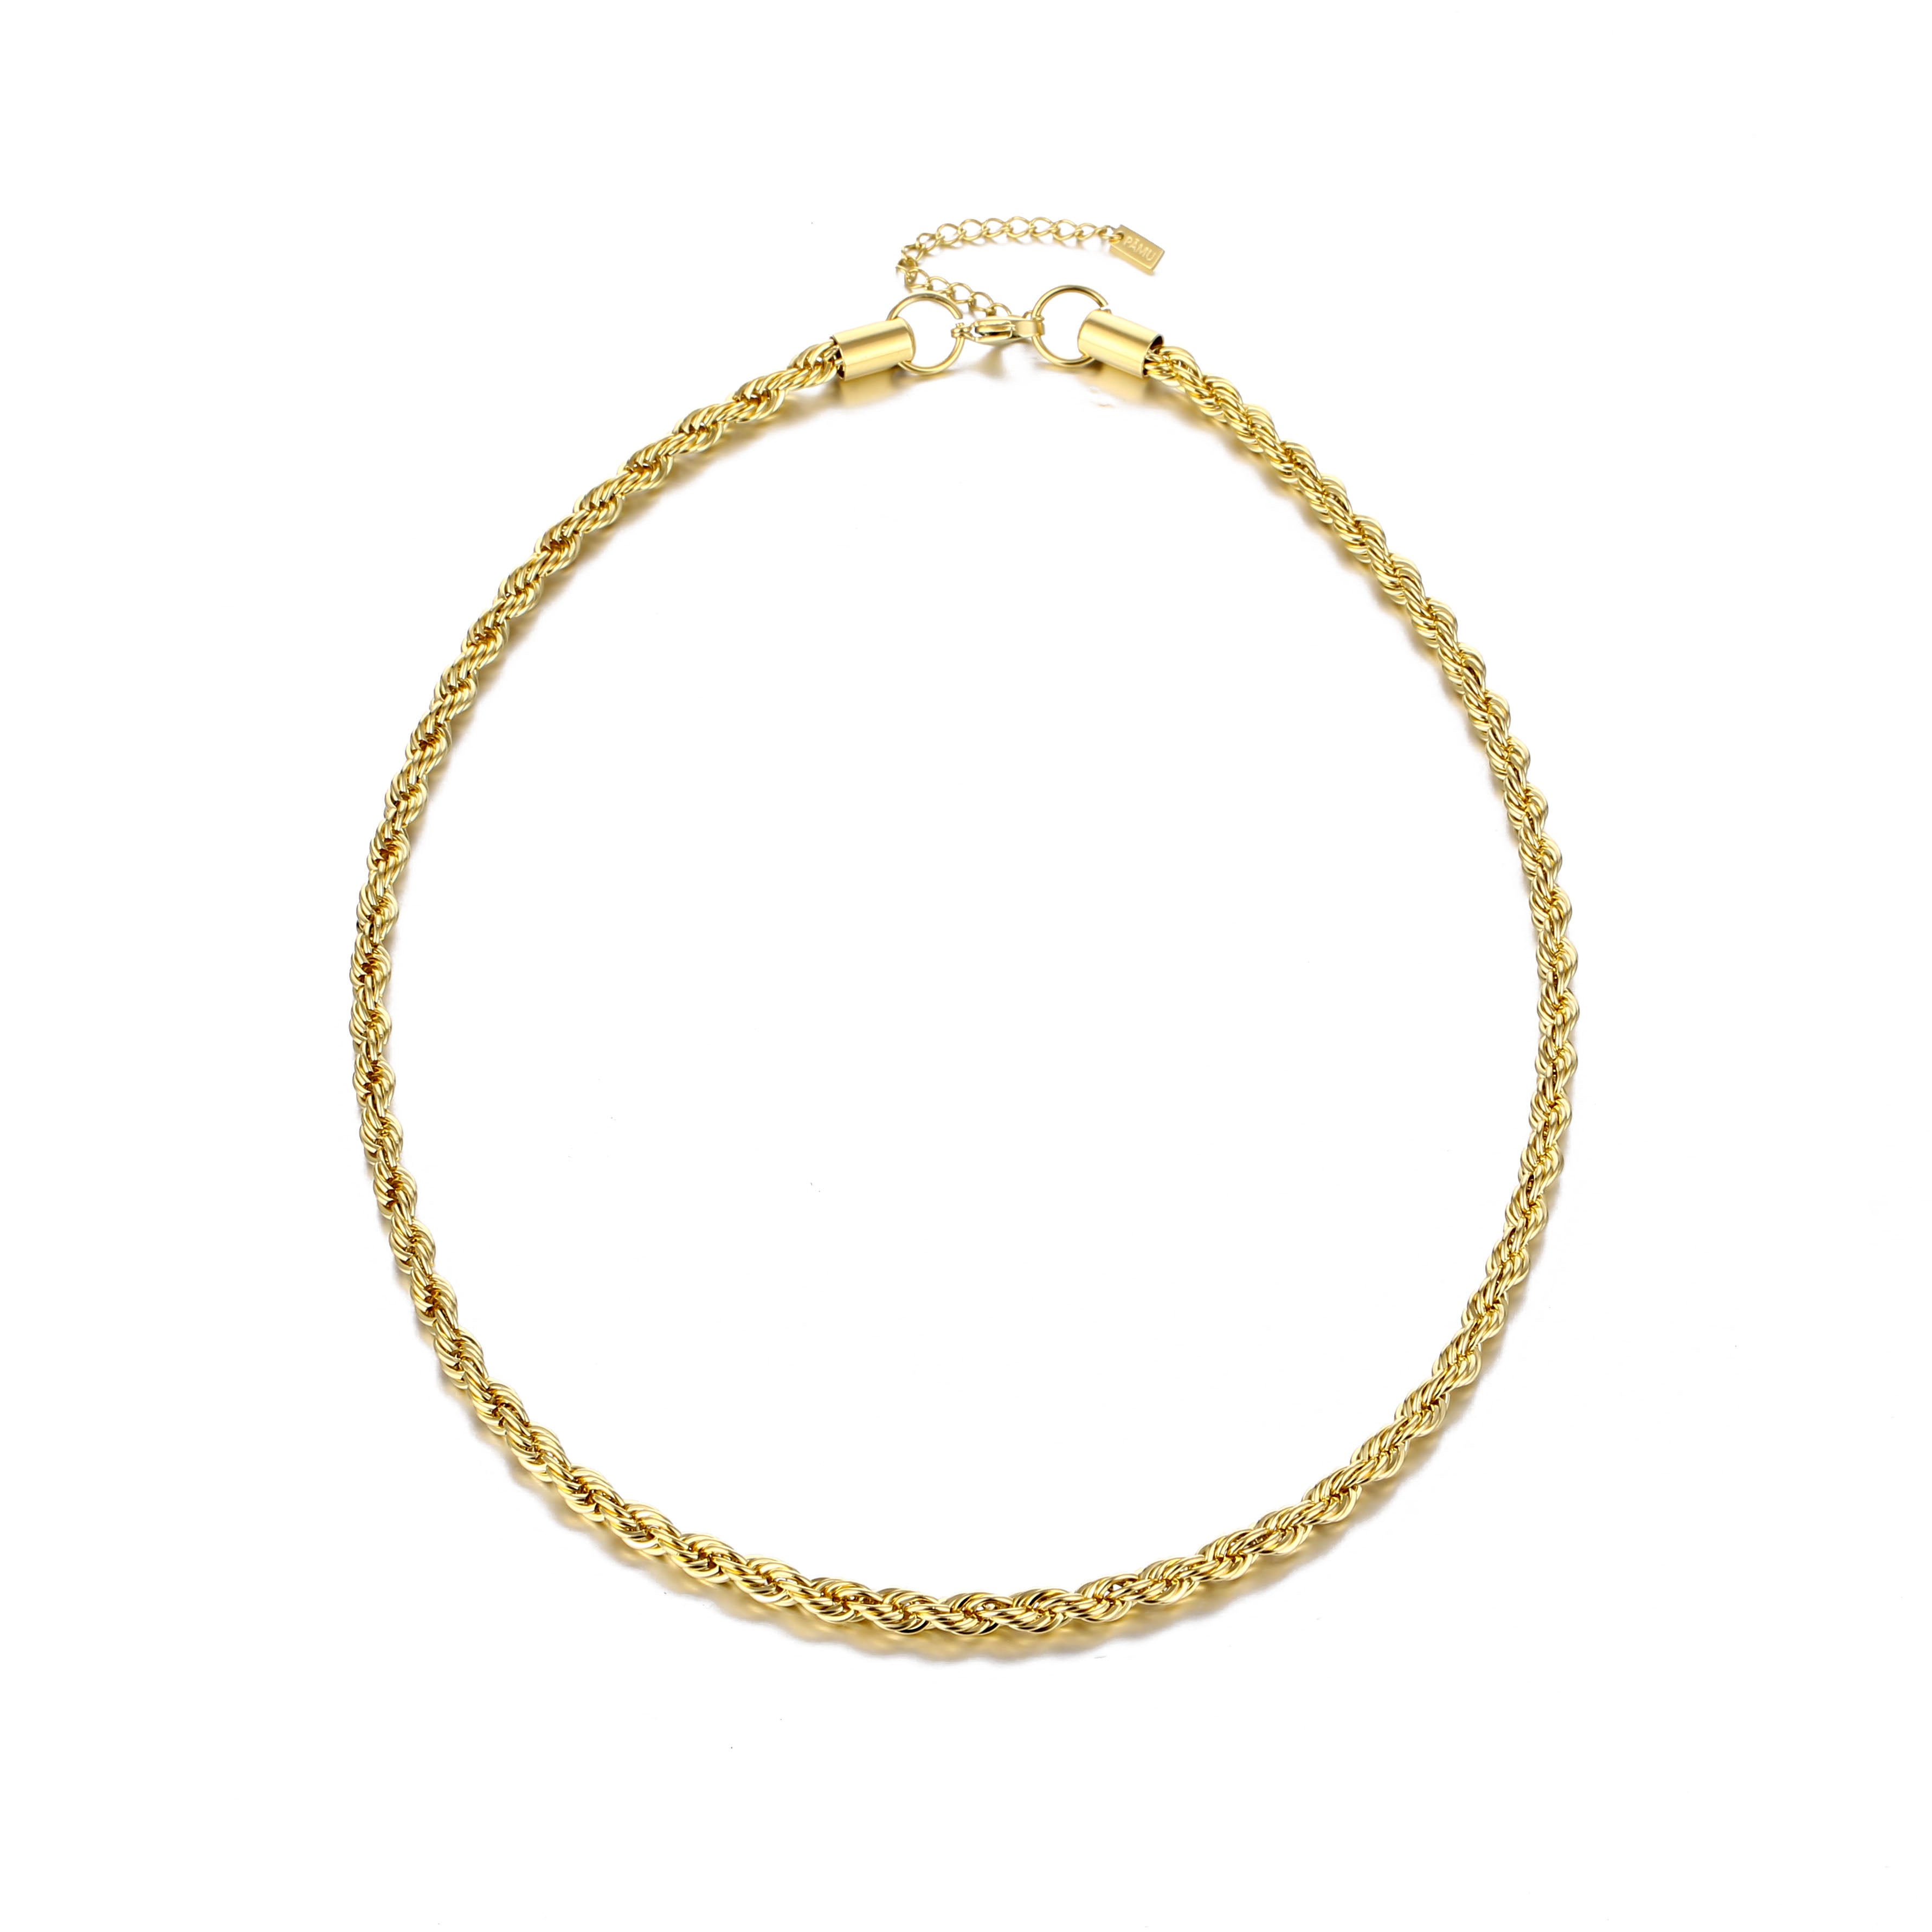 Our stunning Twiggy Necklace is an exquisite blend of elegance and edge. Crafted with precision, this eye-catching accessory features a unique intertwining design th